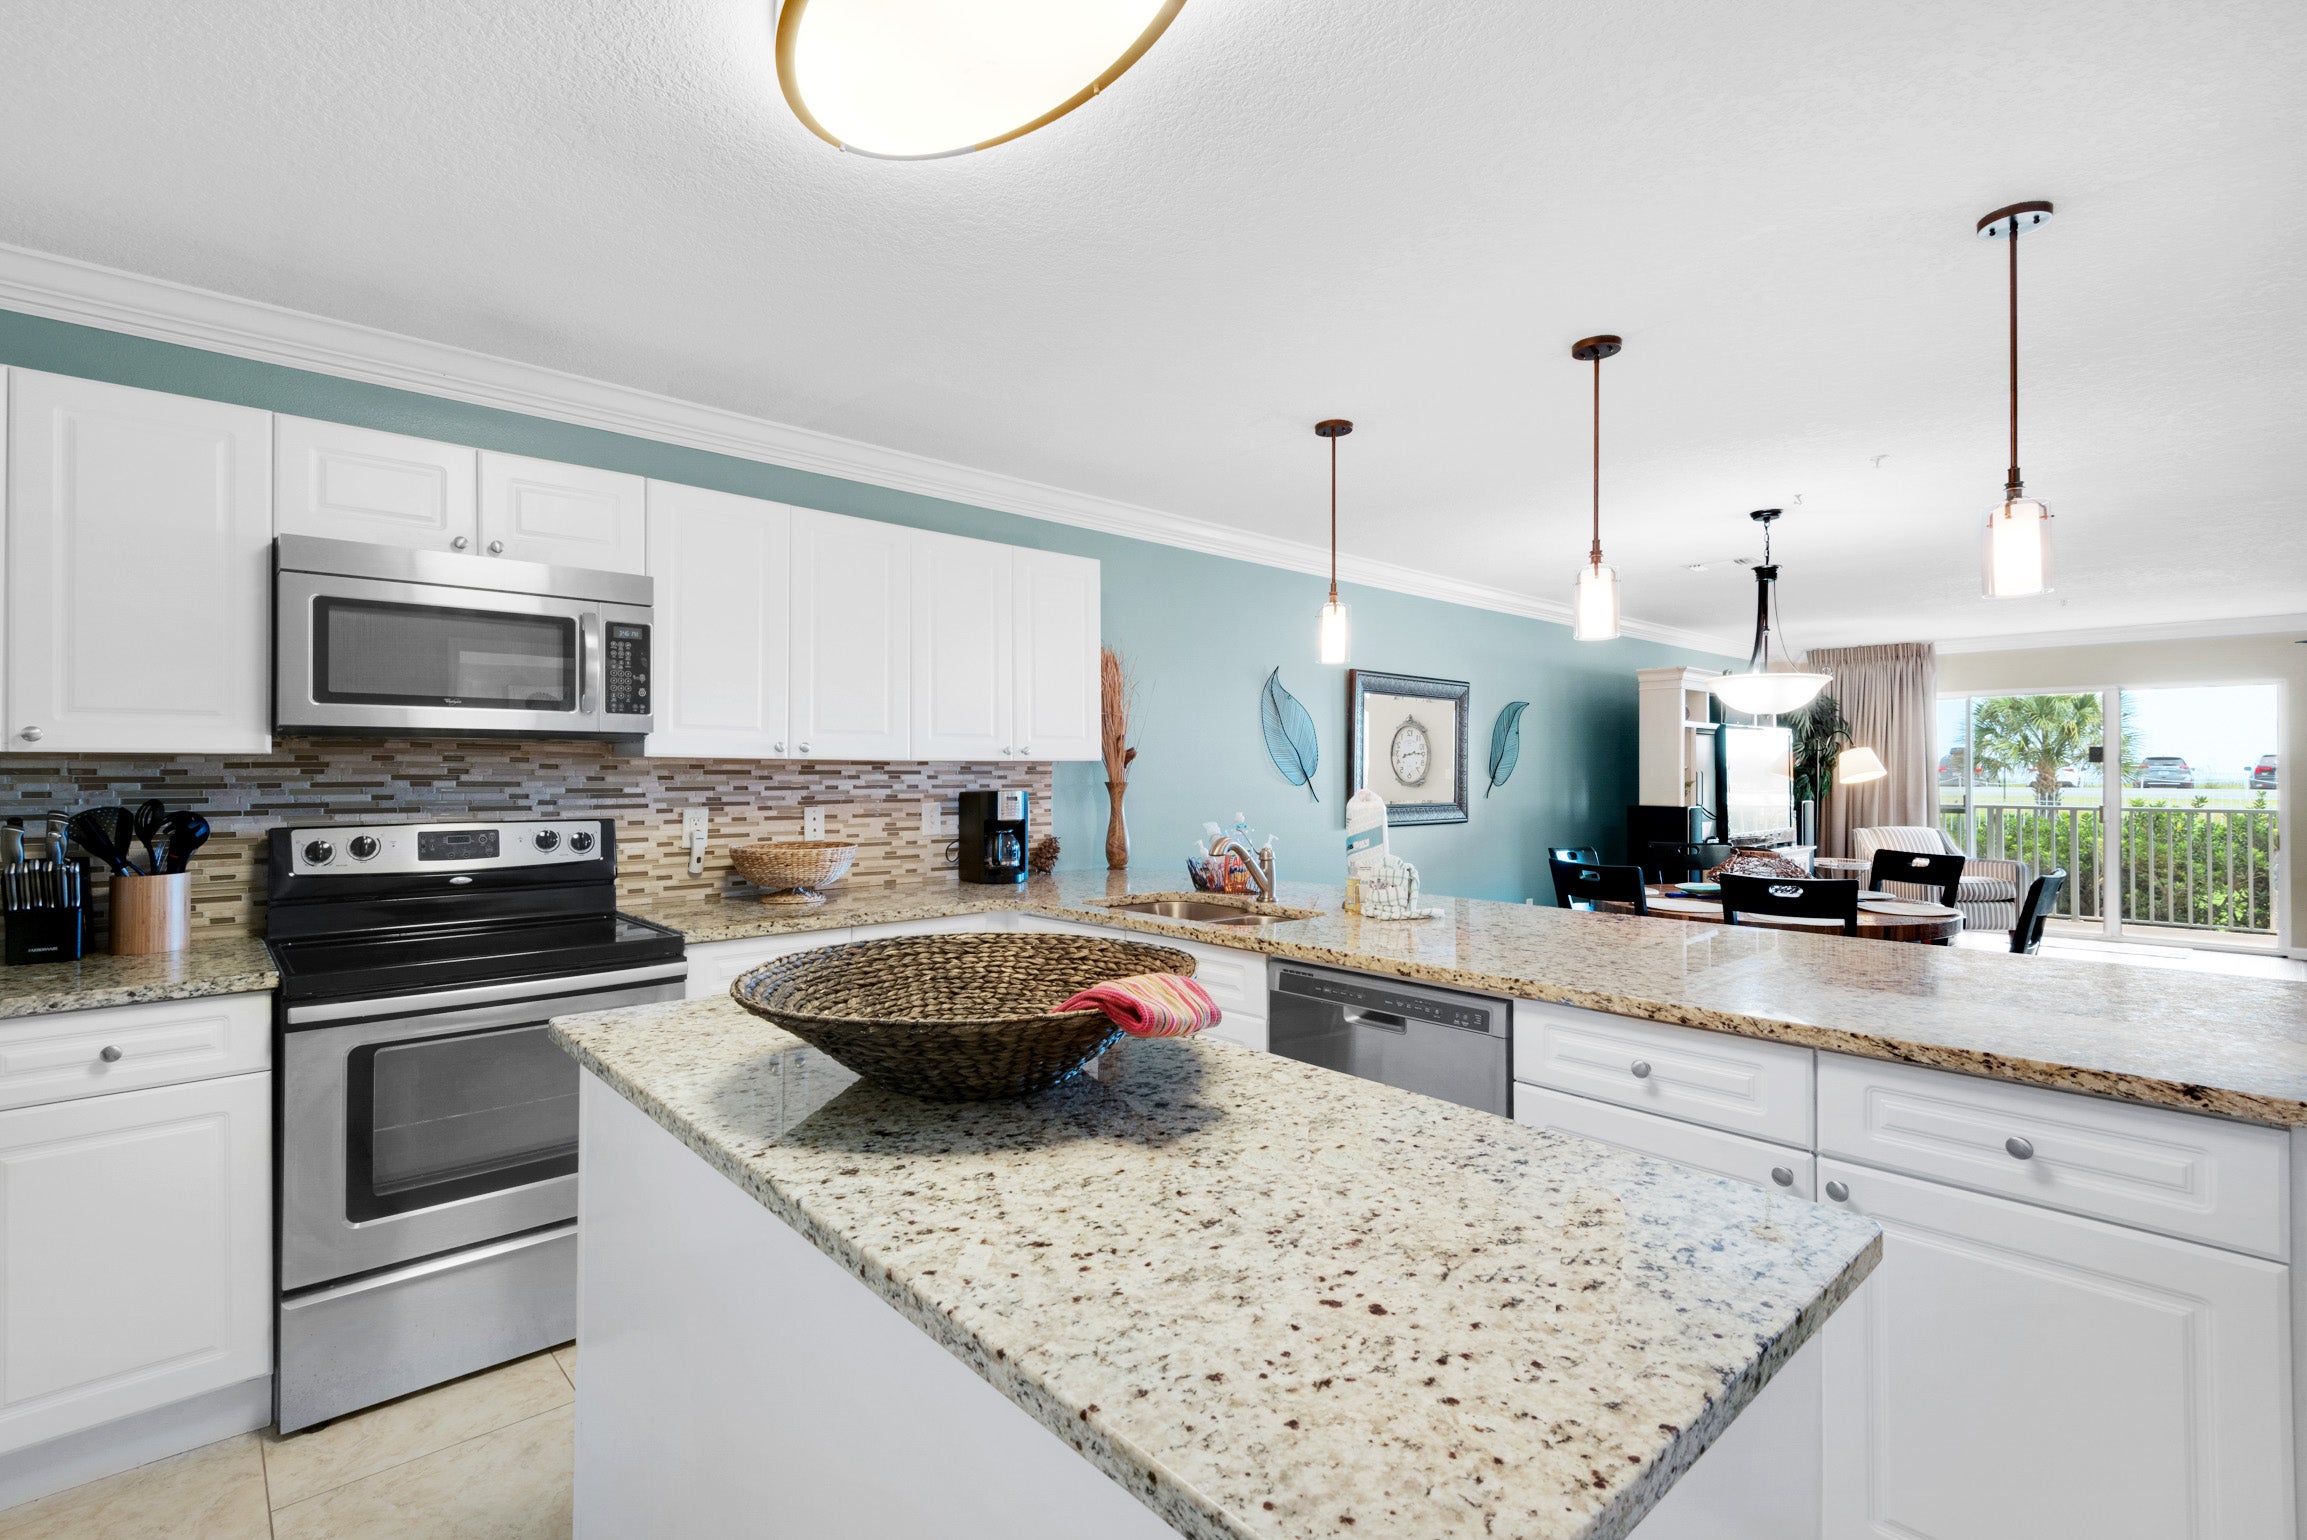 Your crew will LOVE this spacious kitchen